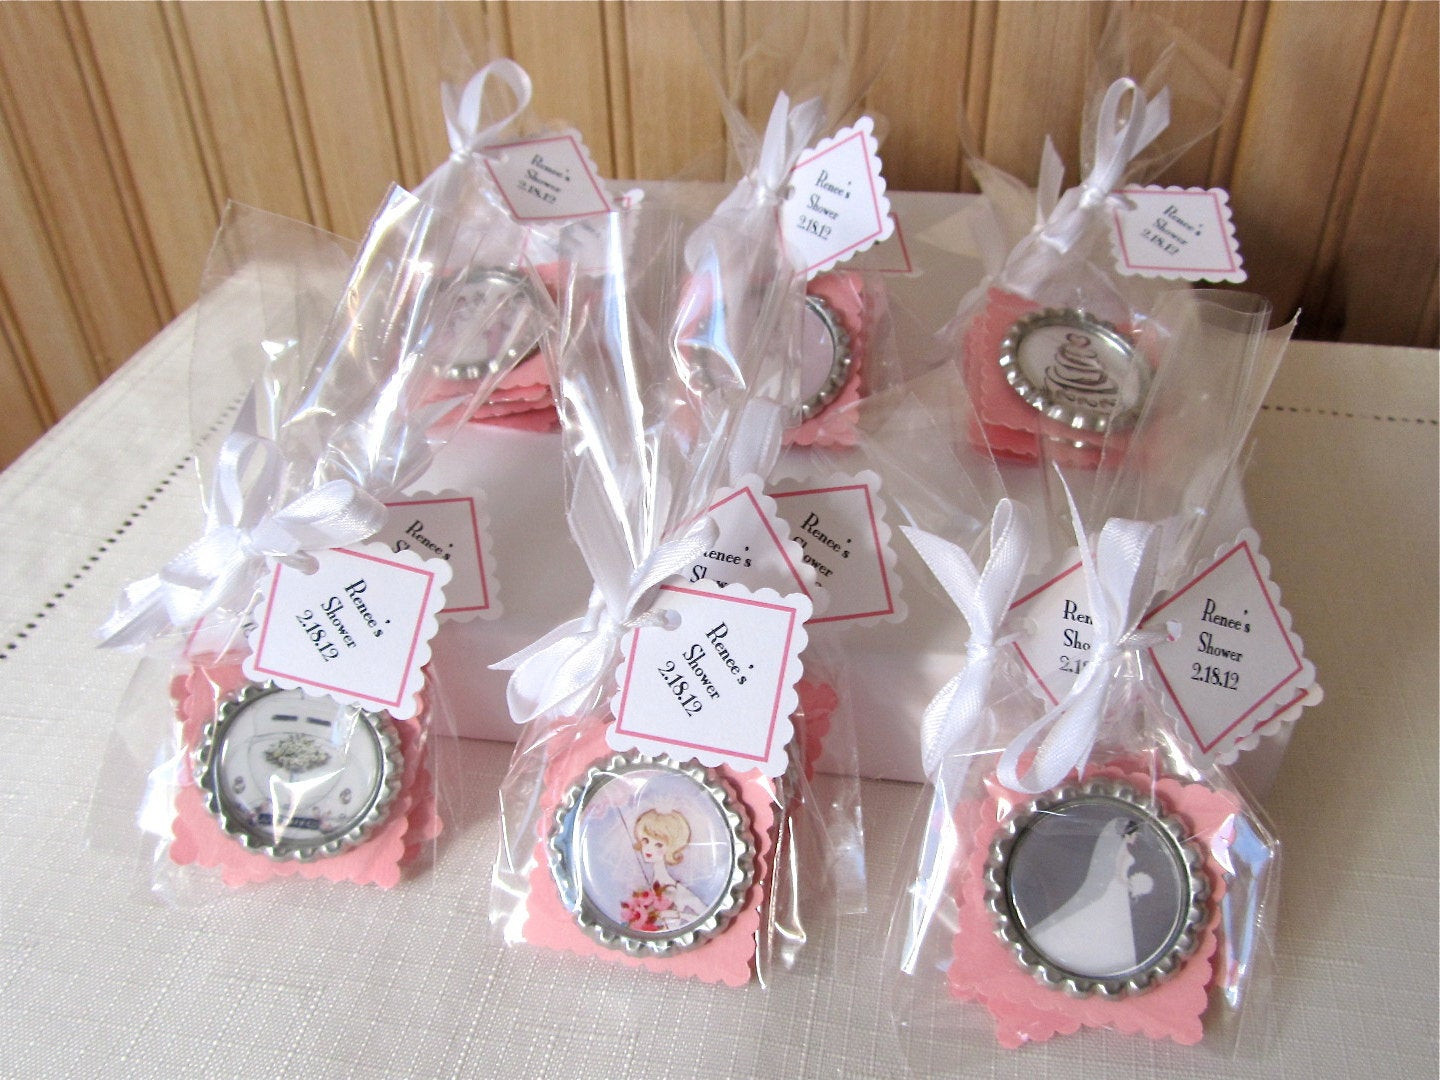 Wedding Favors Etsy
 Bridal Shower Favor Magnets by LeahRHood on Etsy